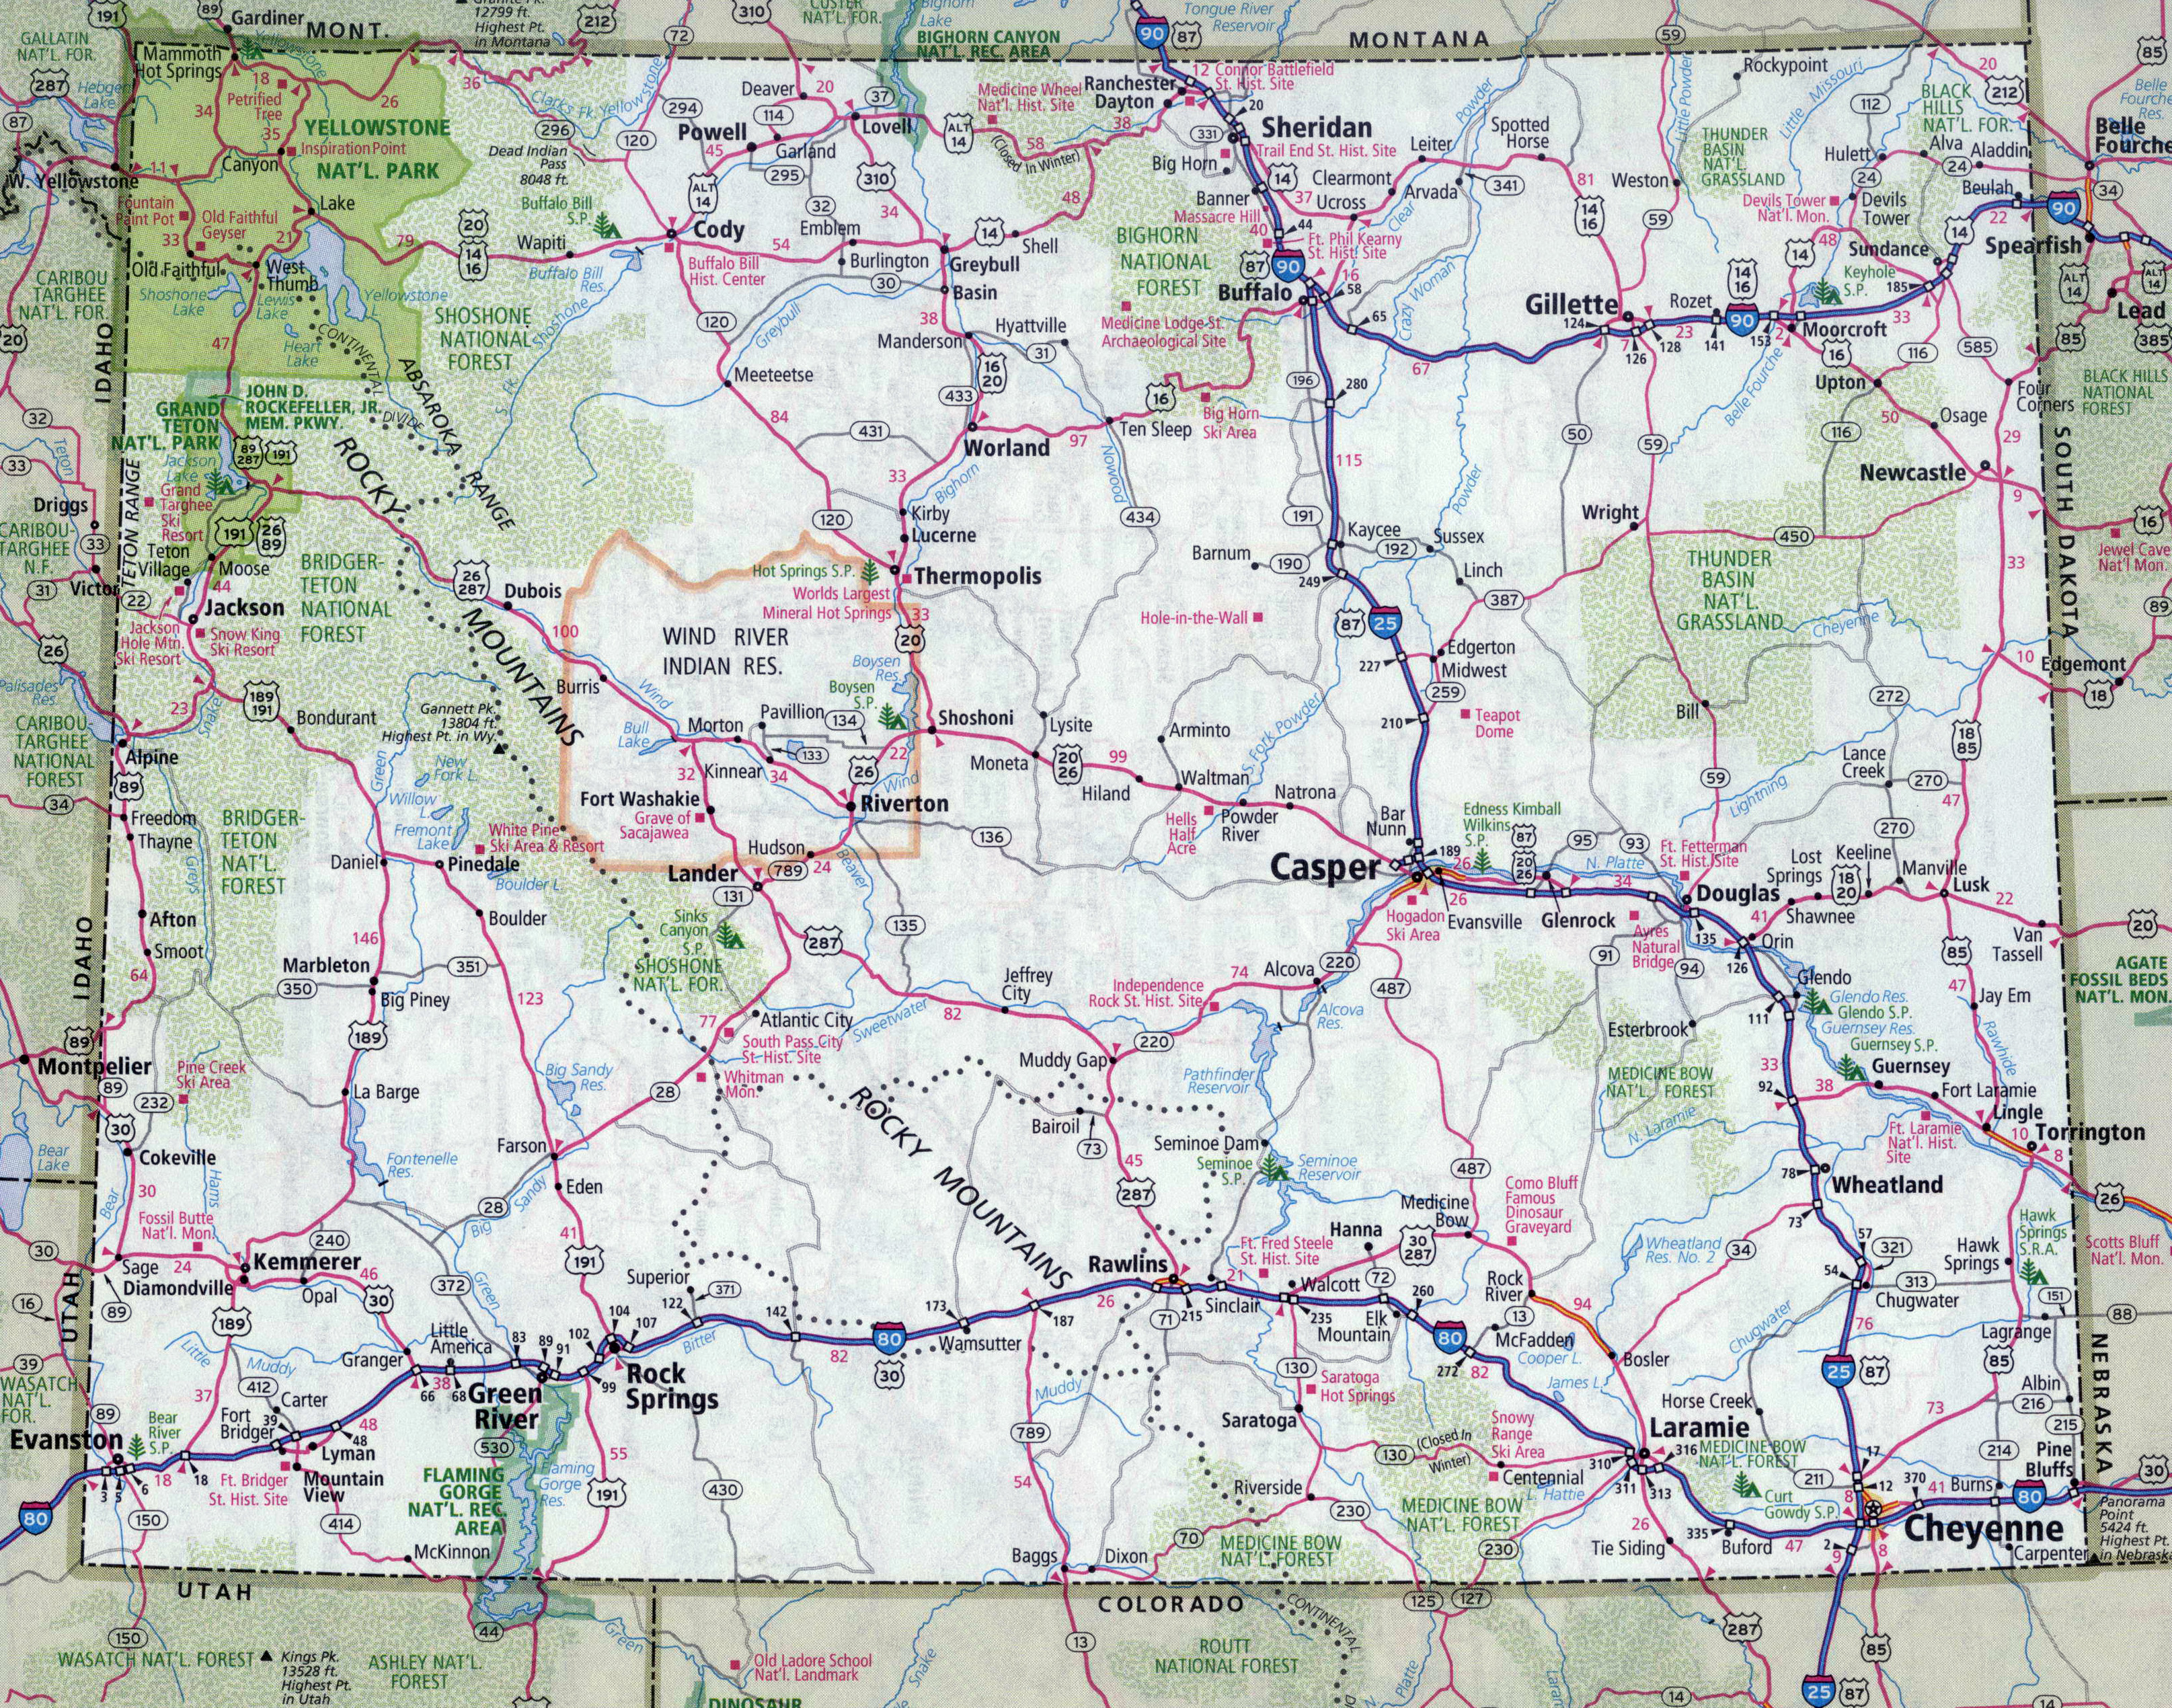 wyoming travel guide and map